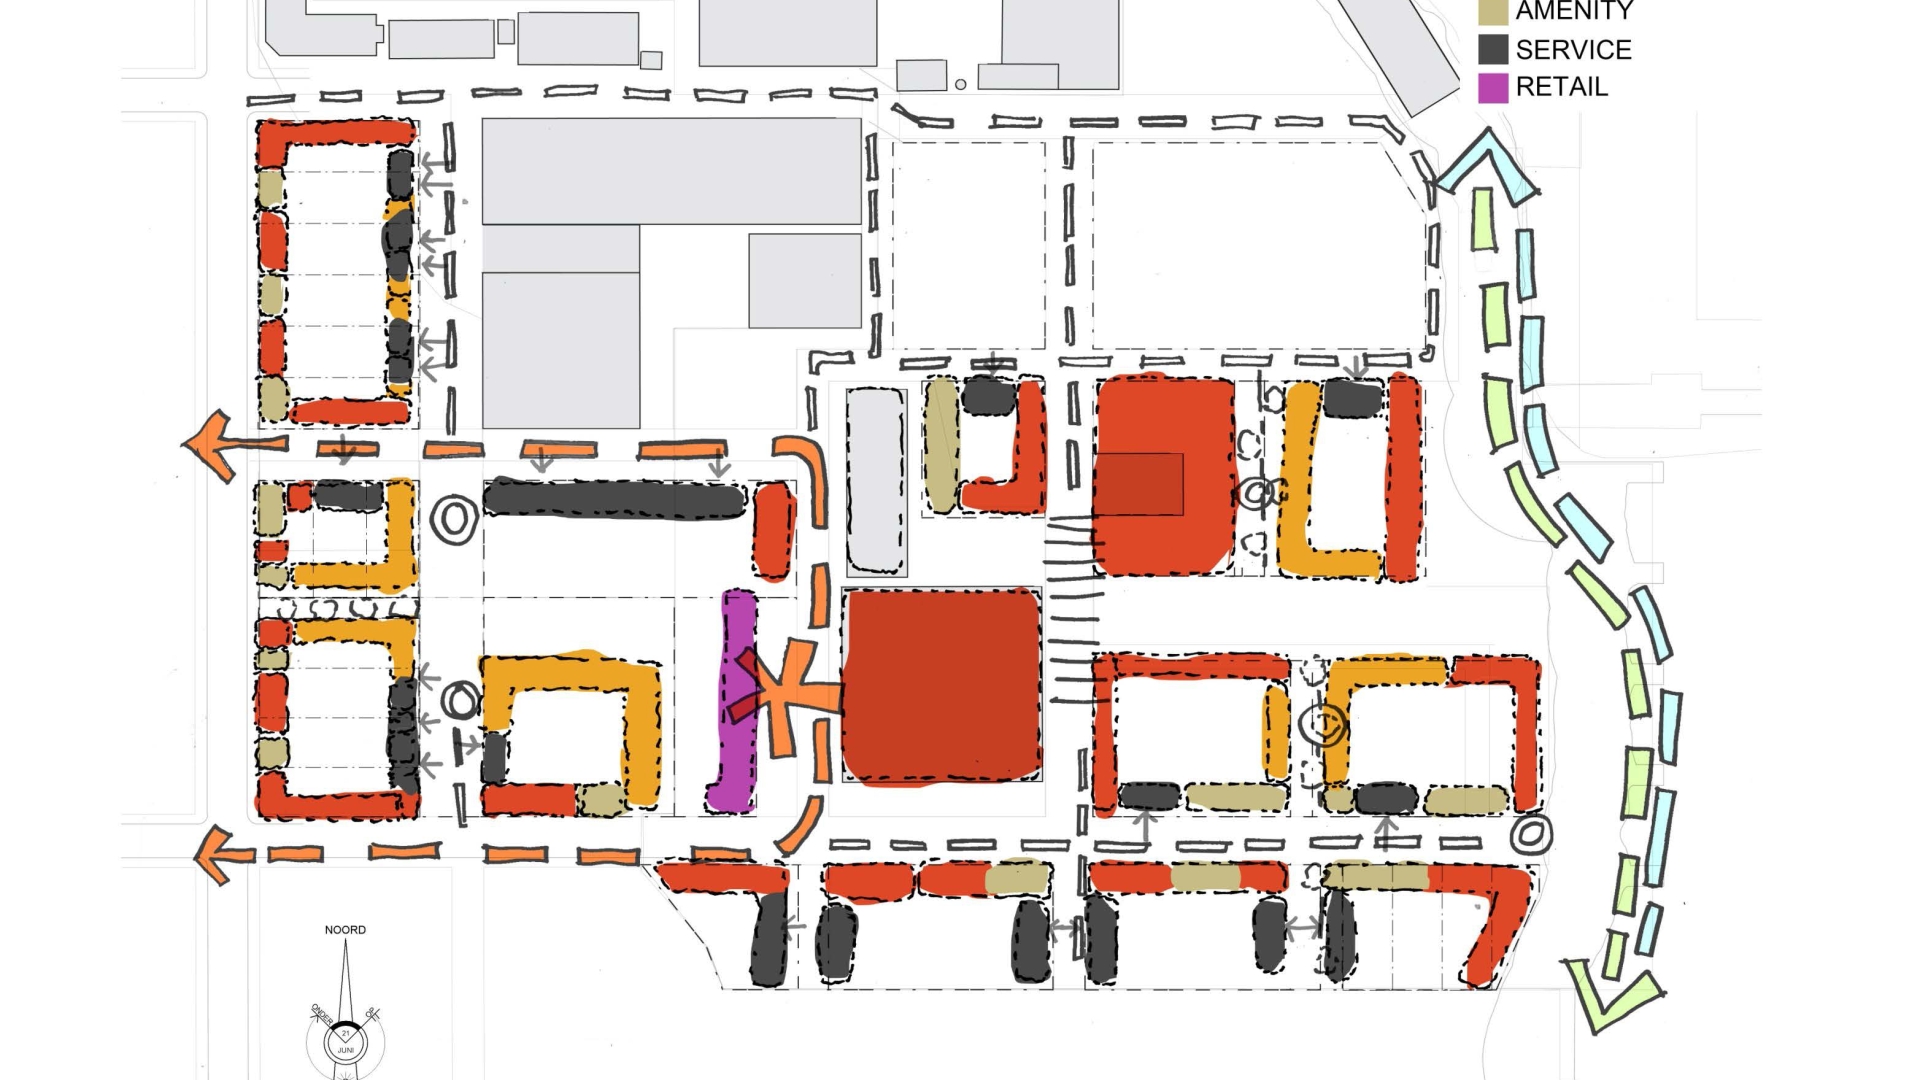 Site plan showing the active ground floor for Pier 70 in San Francisco.